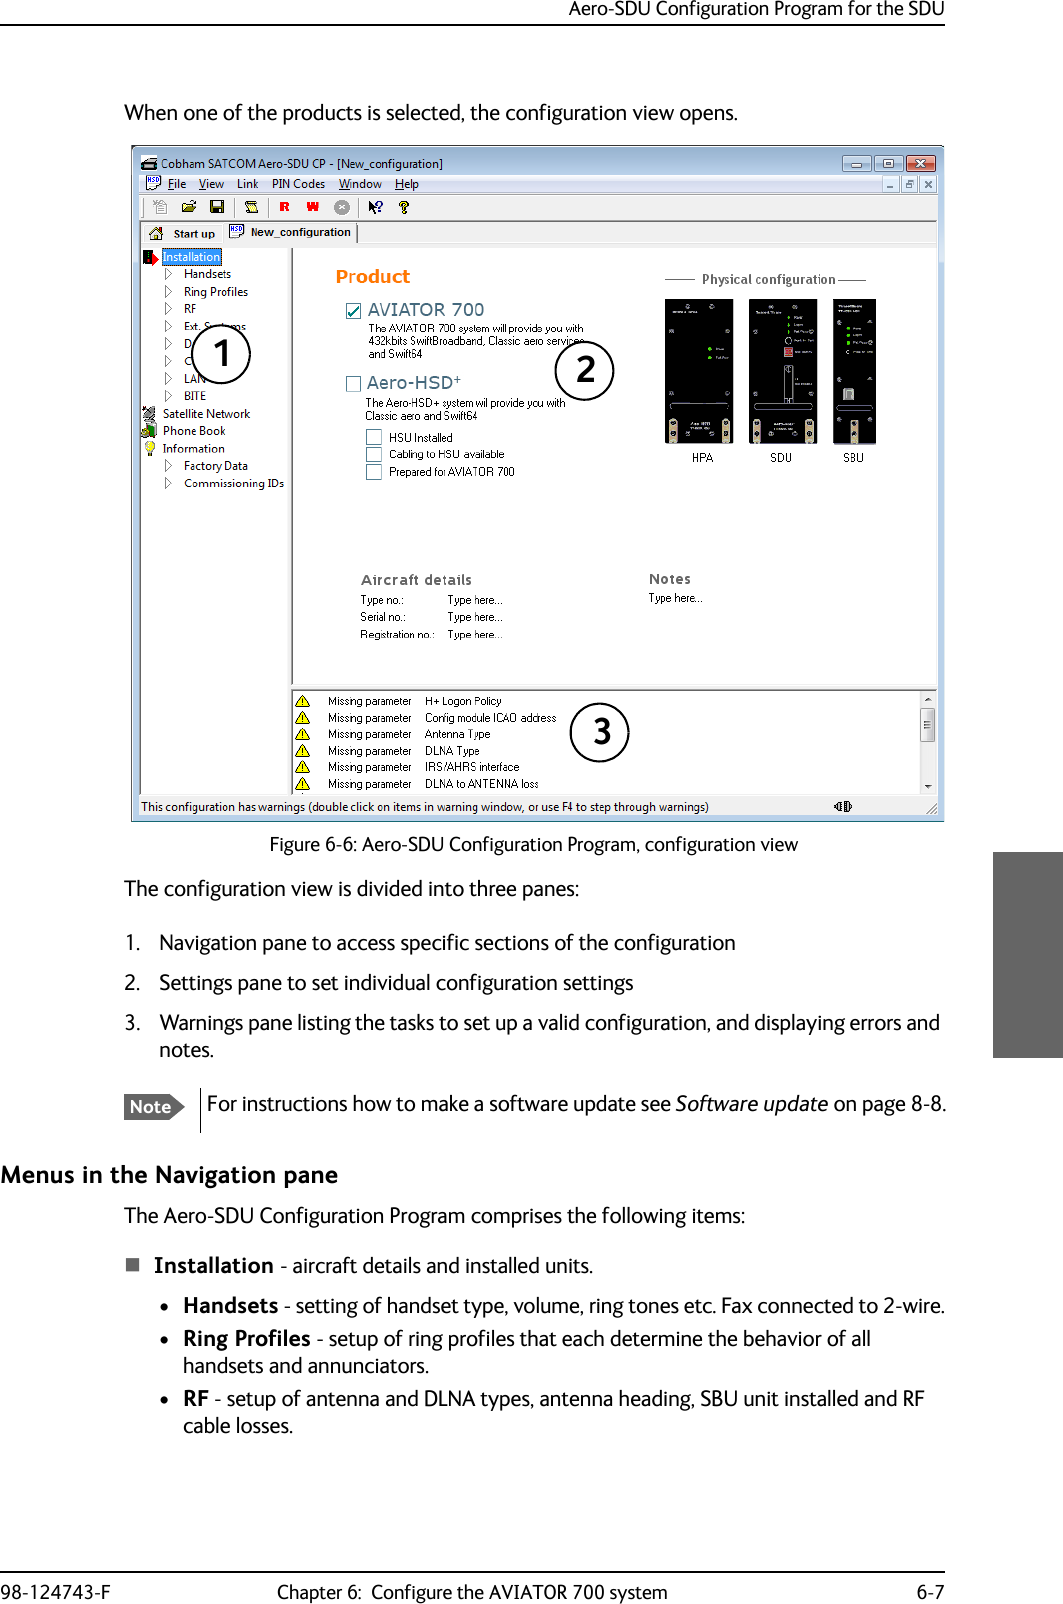 Aero-SDU Configuration Program for the SDU98-124743-F Chapter 6:  Configure the AVIATOR 700 system 6-7When one of the products is selected, the configuration view opens.Figure 6-6: Aero-SDU Configuration Program, configuration viewThe configuration view is divided into three panes:1. Navigation pane to access specific sections of the configuration2. Settings pane to set individual configuration settings3. Warnings pane listing the tasks to set up a valid configuration, and displaying errors and notes. Menus in the Navigation paneThe Aero-SDU Configuration Program comprises the following items:Installation - aircraft details and installed units.•Handsets - setting of handset type, volume, ring tones etc. Fax connected to 2-wire.•Ring Profiles - setup of ring profiles that each determine the behavior of all handsets and annunciators.•RF - setup of antenna and DLNA types, antenna heading, SBU unit installed and RF cable losses.NoteFor instructions how to make a software update see Software update on page 8-8.123